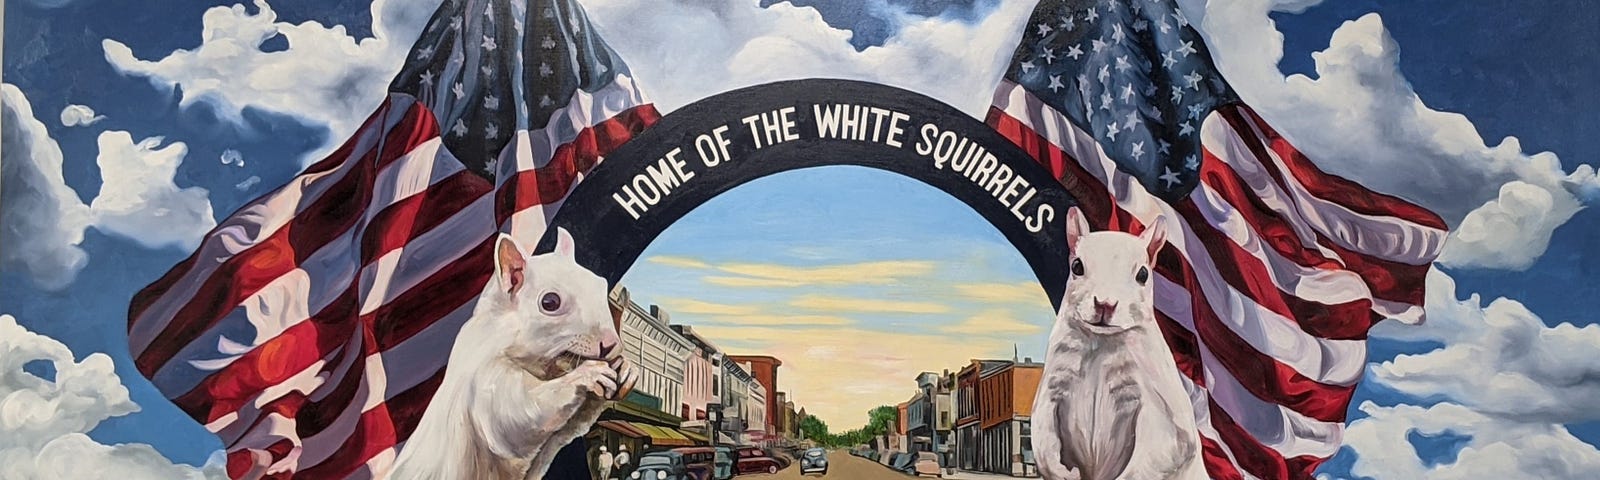 This is a sign of two white squirrels in Olney, Illinois.